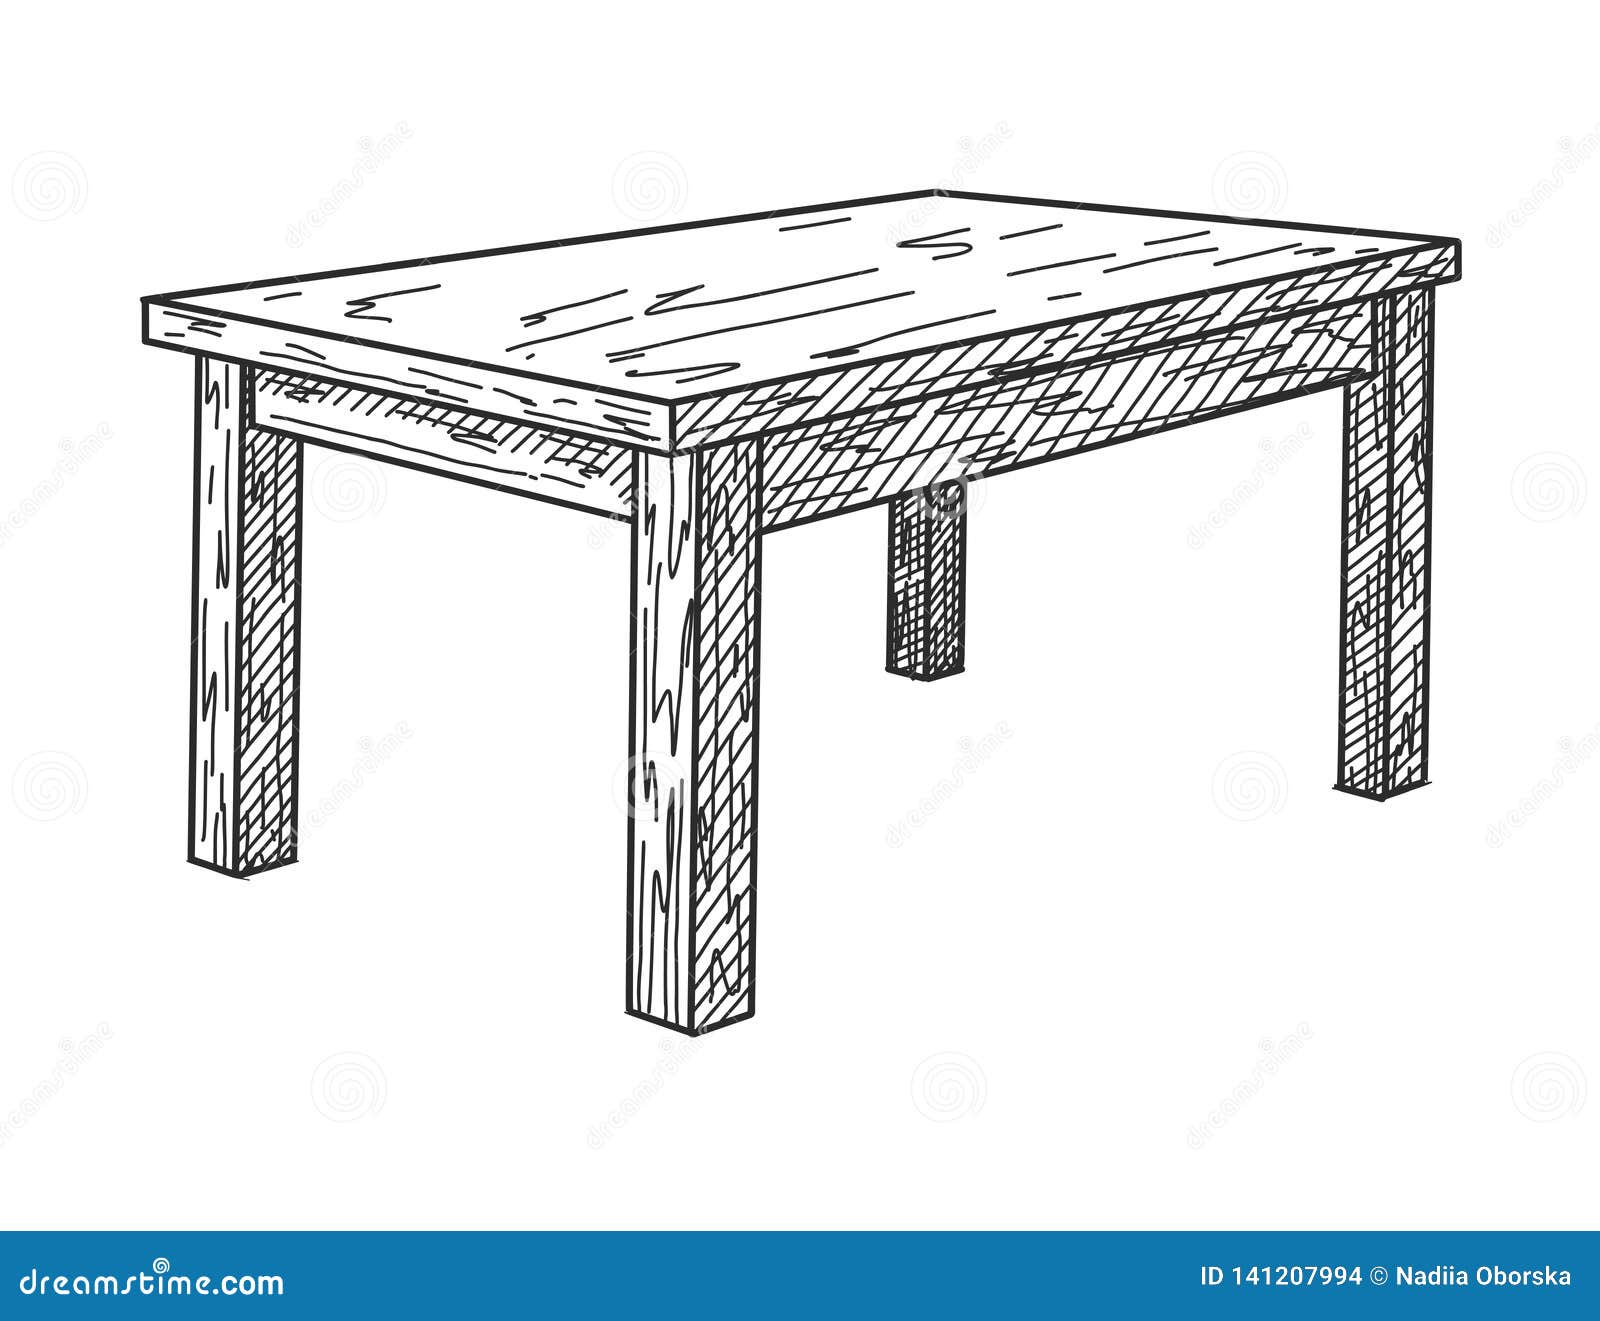 Realistic Sketch Of The Table In Perspective. Vector Stock Illustration ...